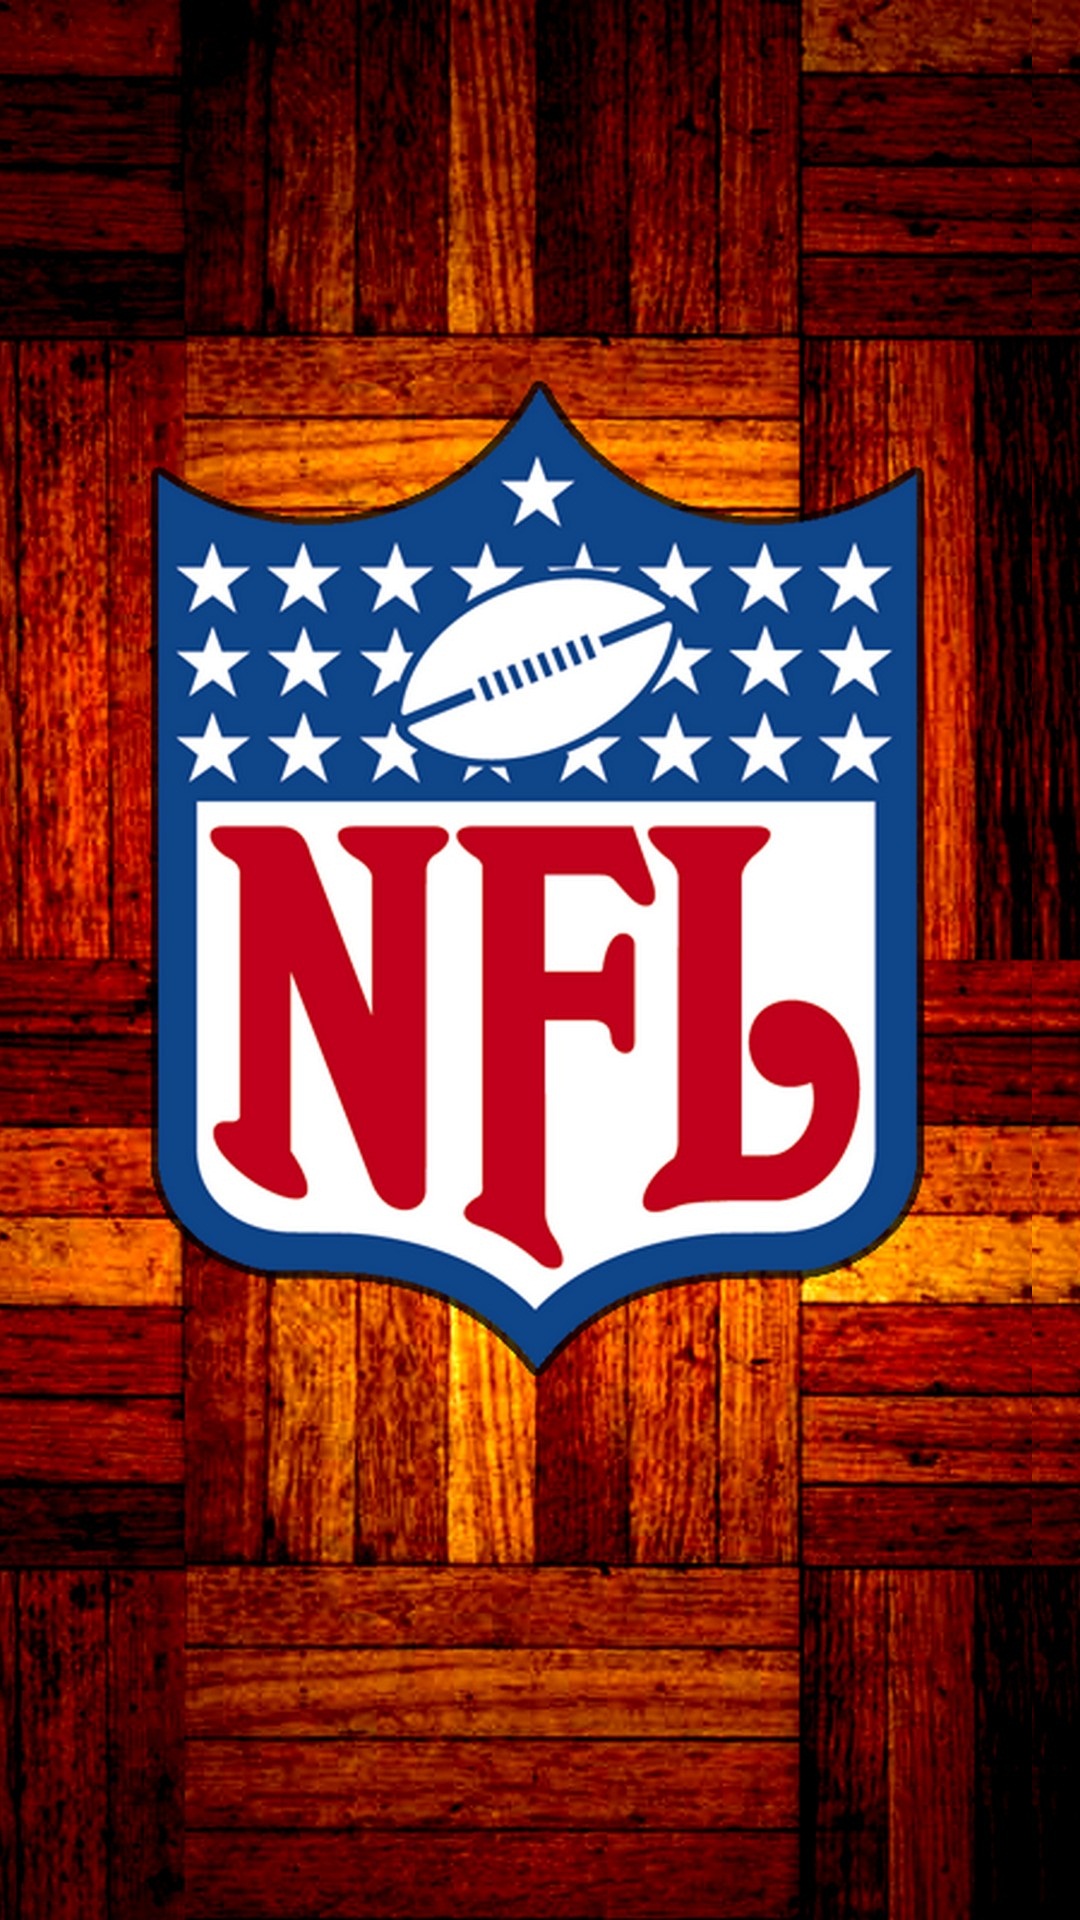 NFL HD Wallpaper For iPhone With Resolution 1080X1920